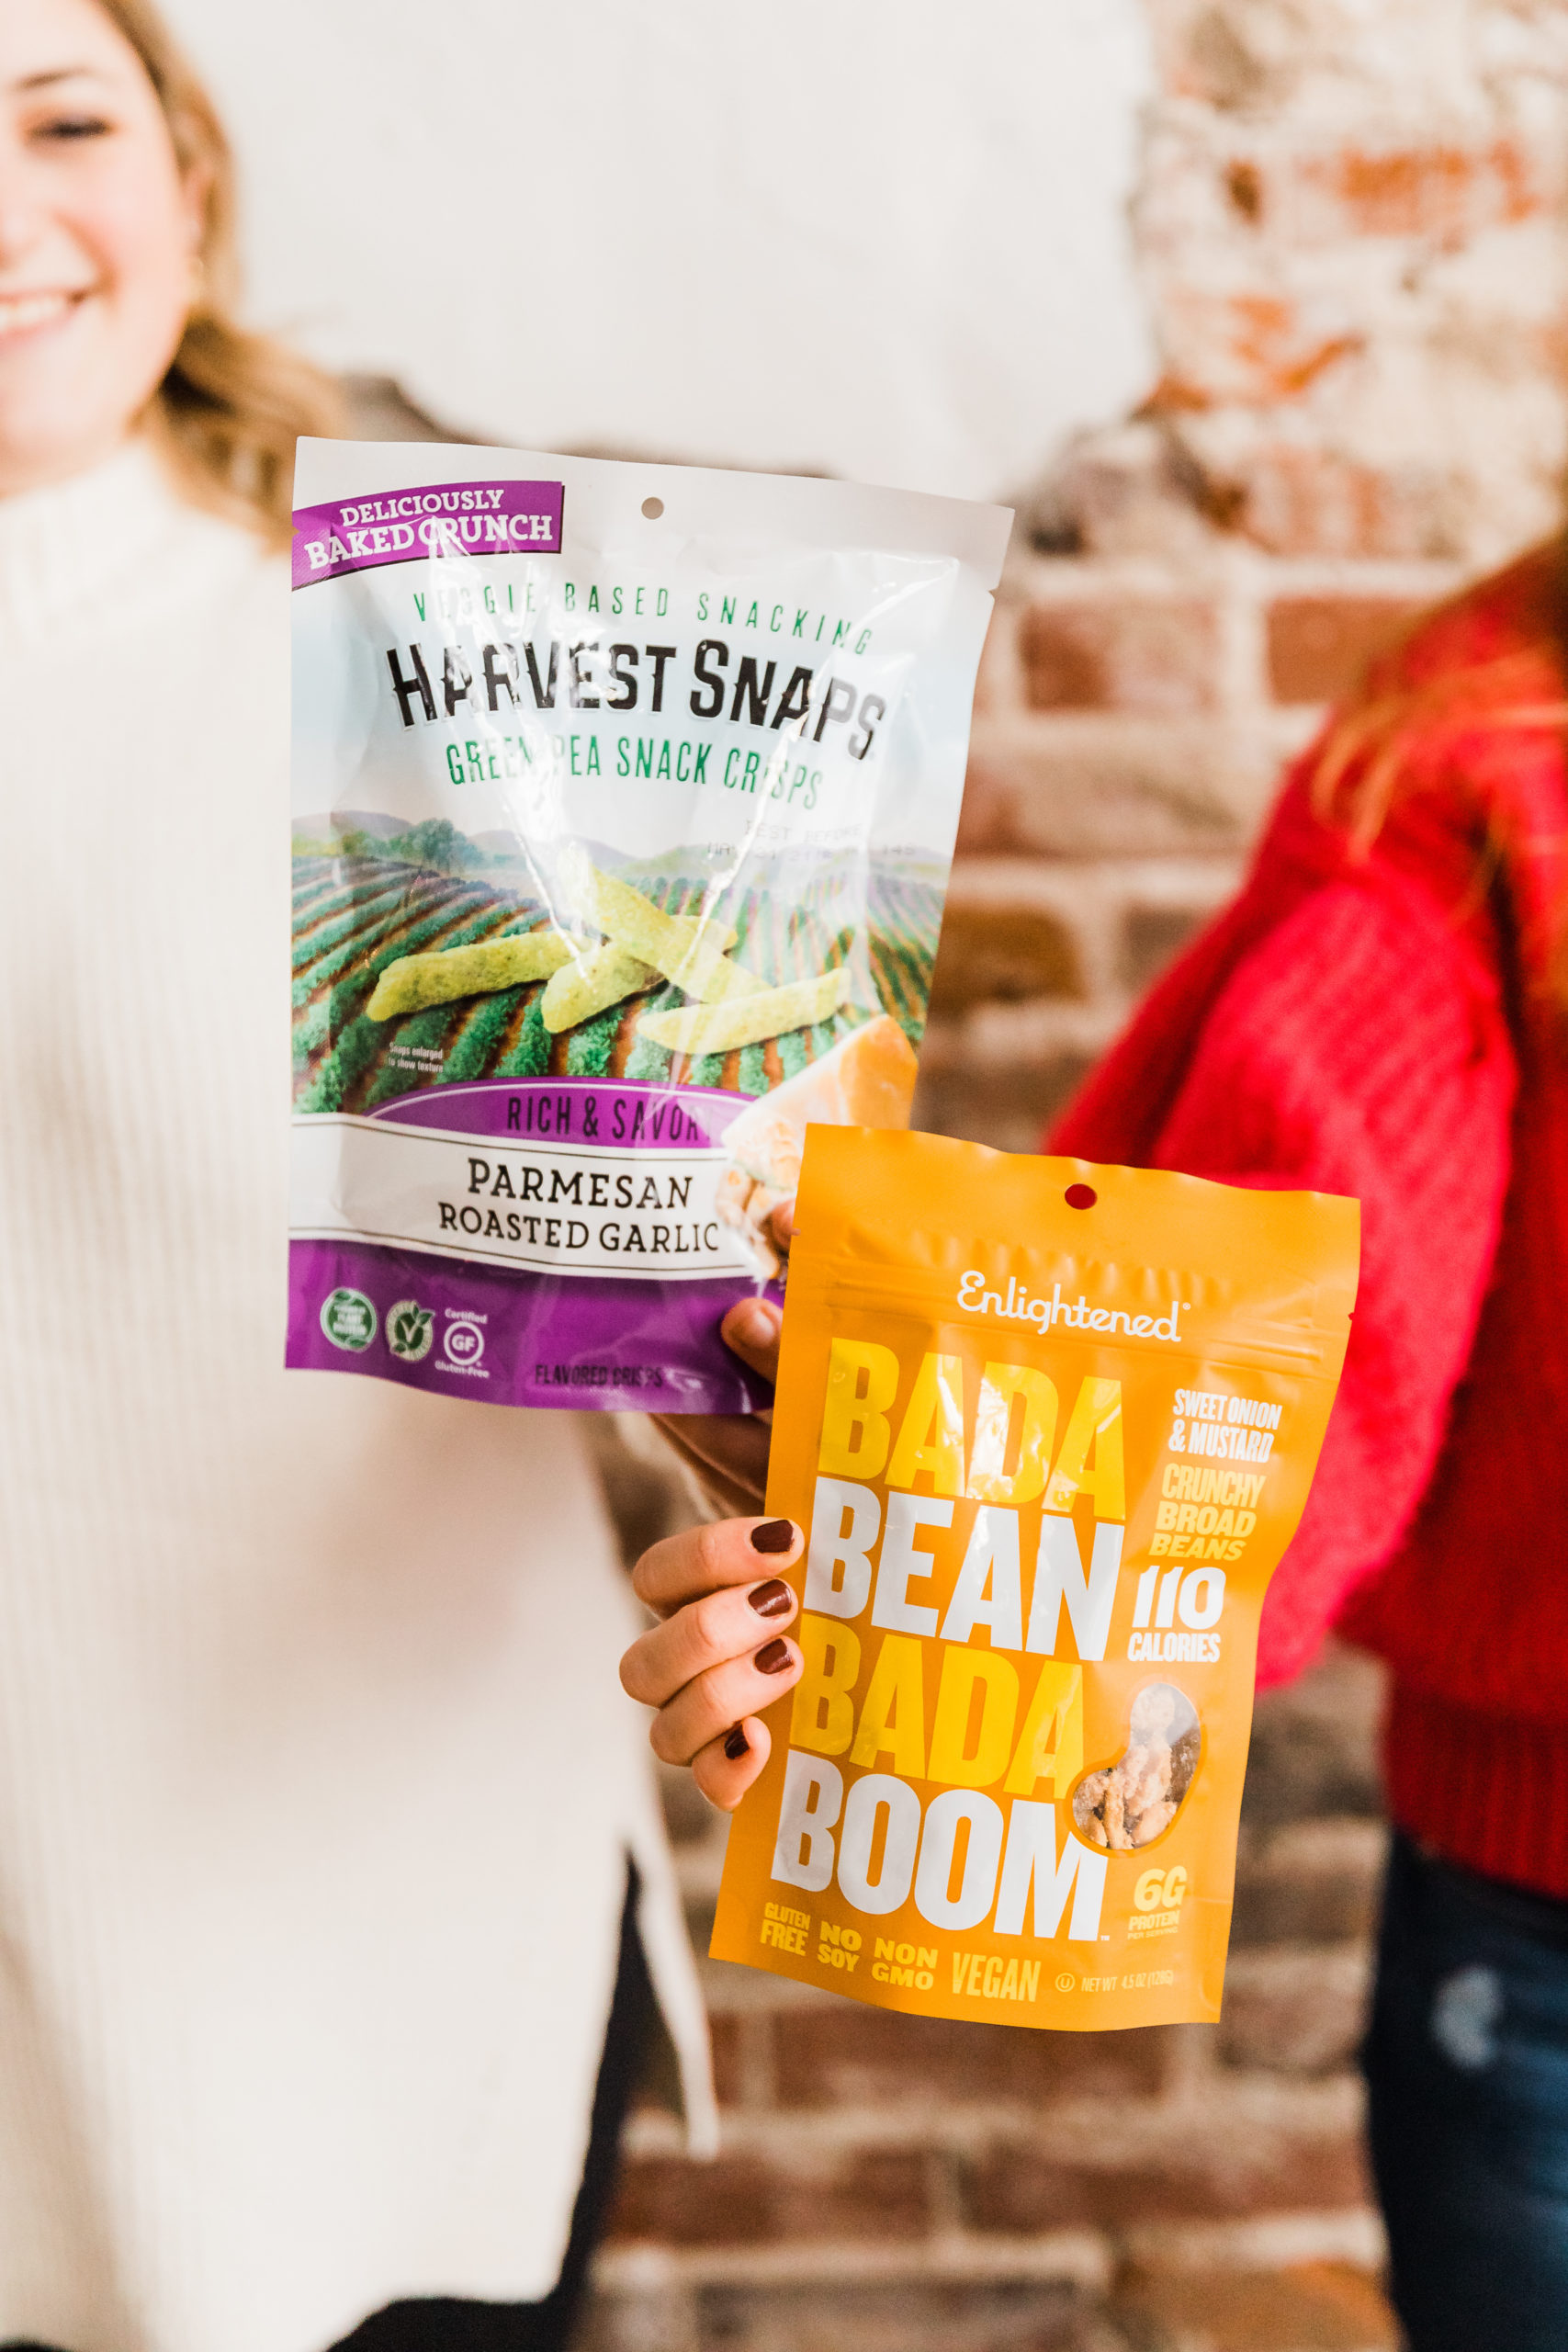 Bag of crunchy roasted peas and a bag of bada bean bada boom beans are held by dietitians Alex Harris and Jen Lyman